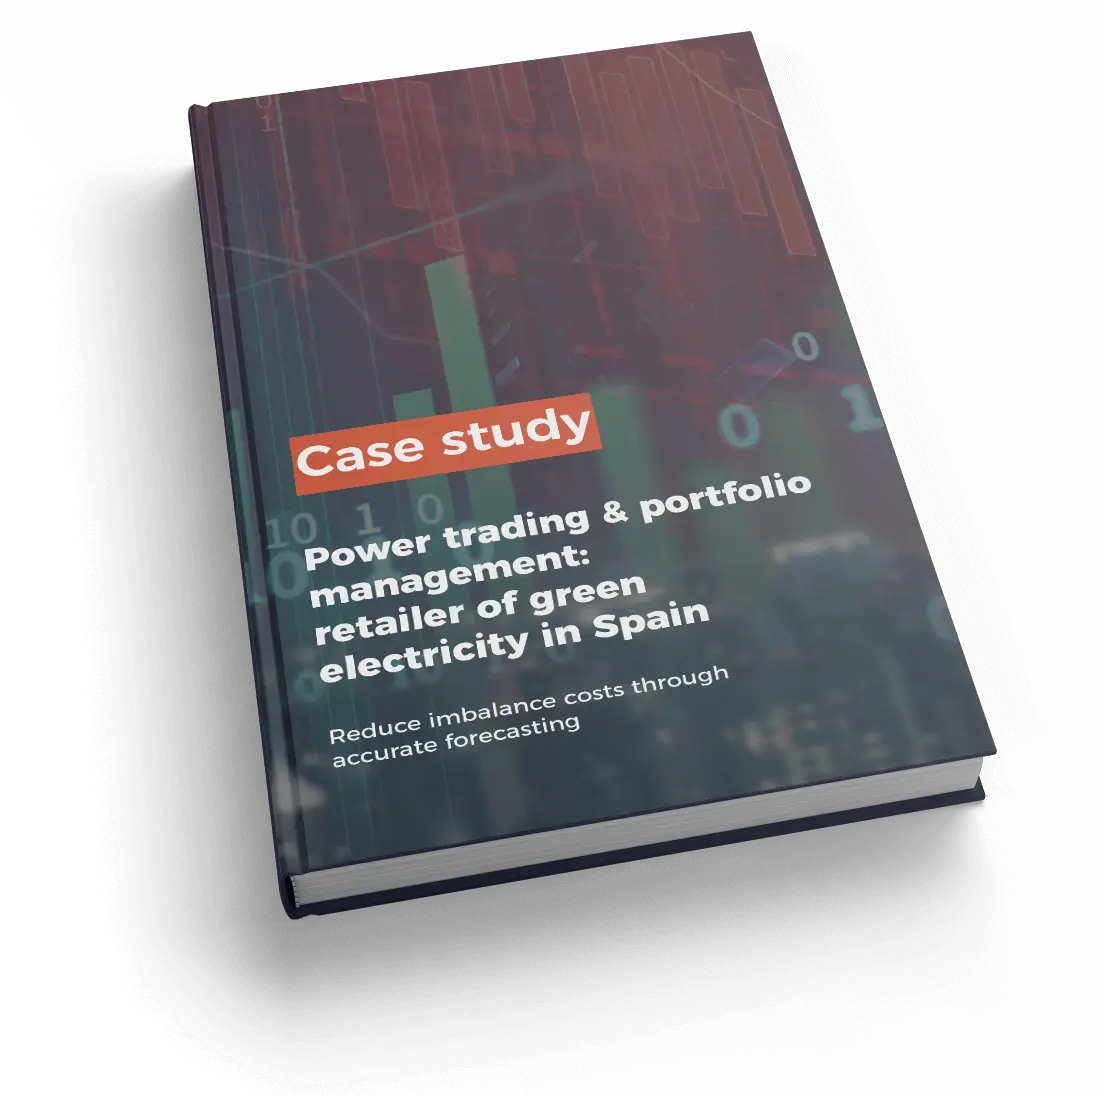 Case study for renewable energy traders and portfolio managers